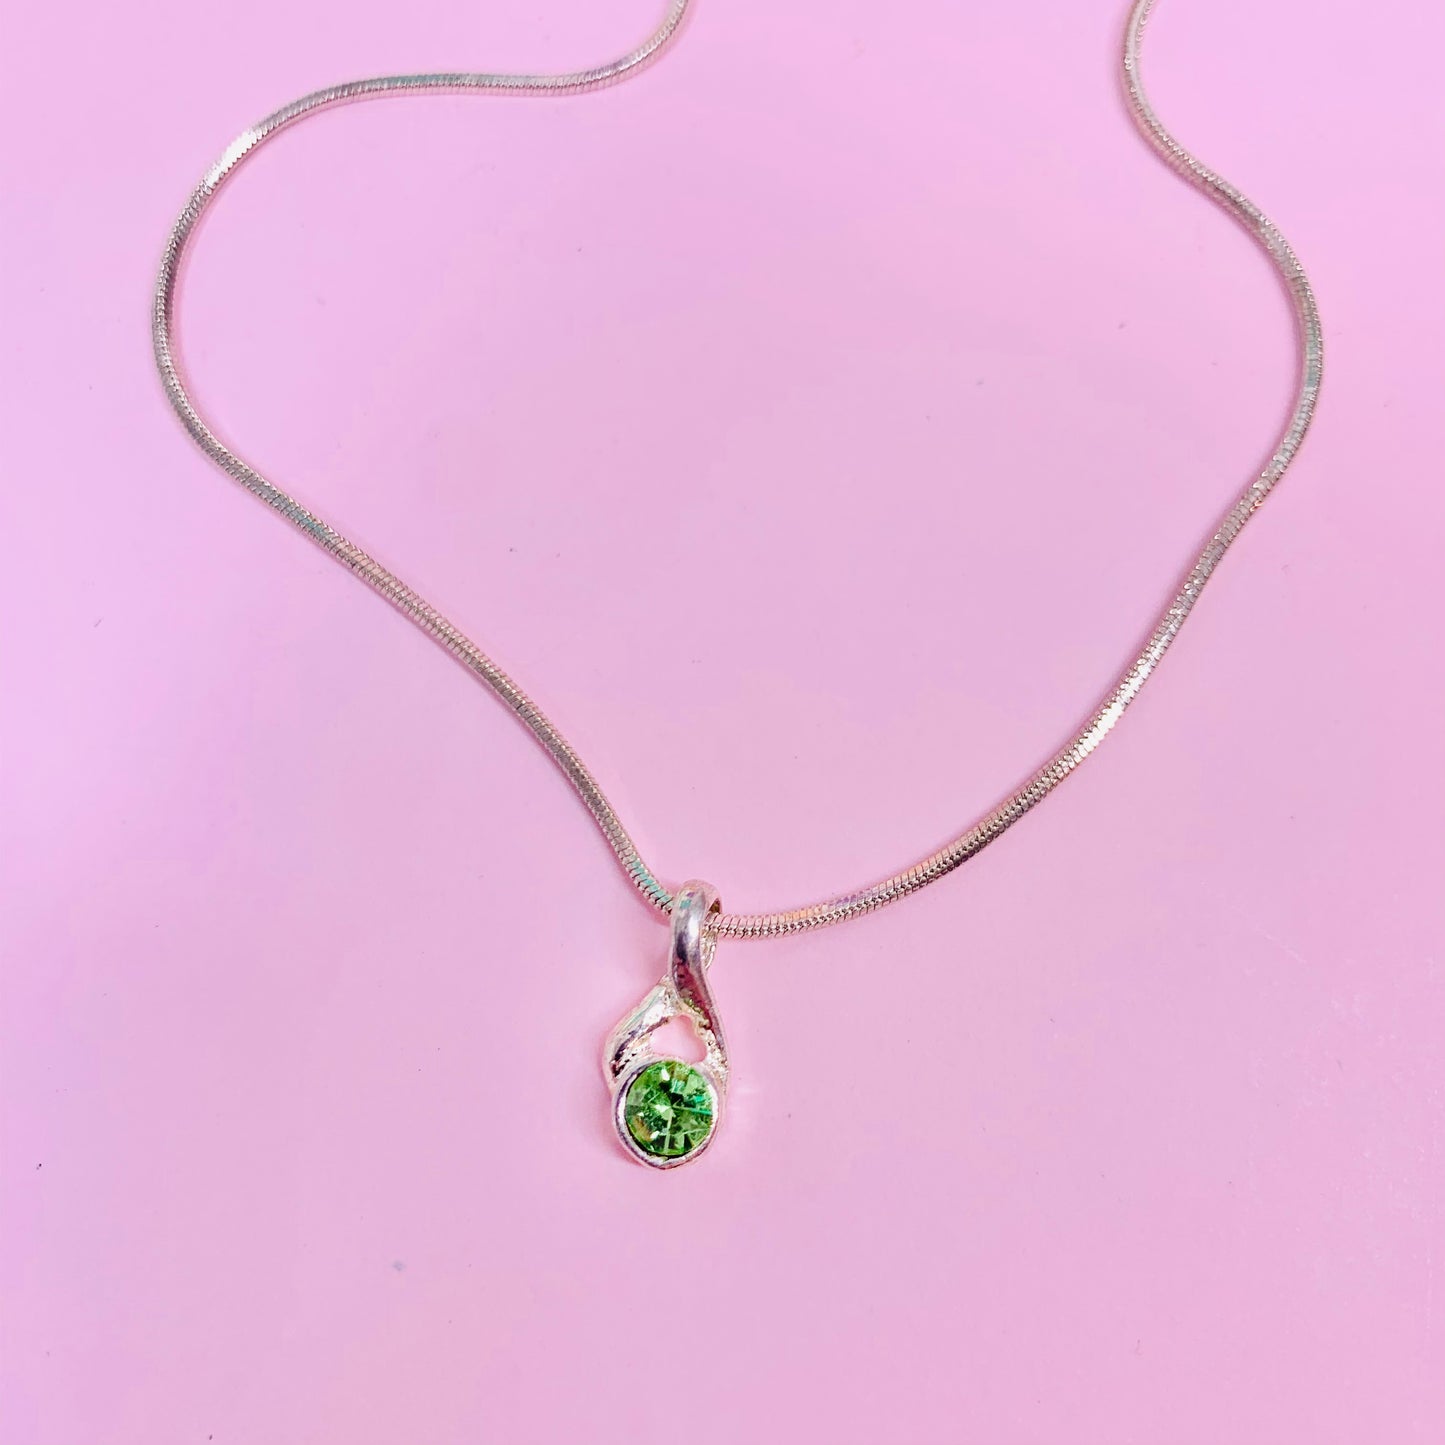 1970s silver plated chain with green rhinestone pendant